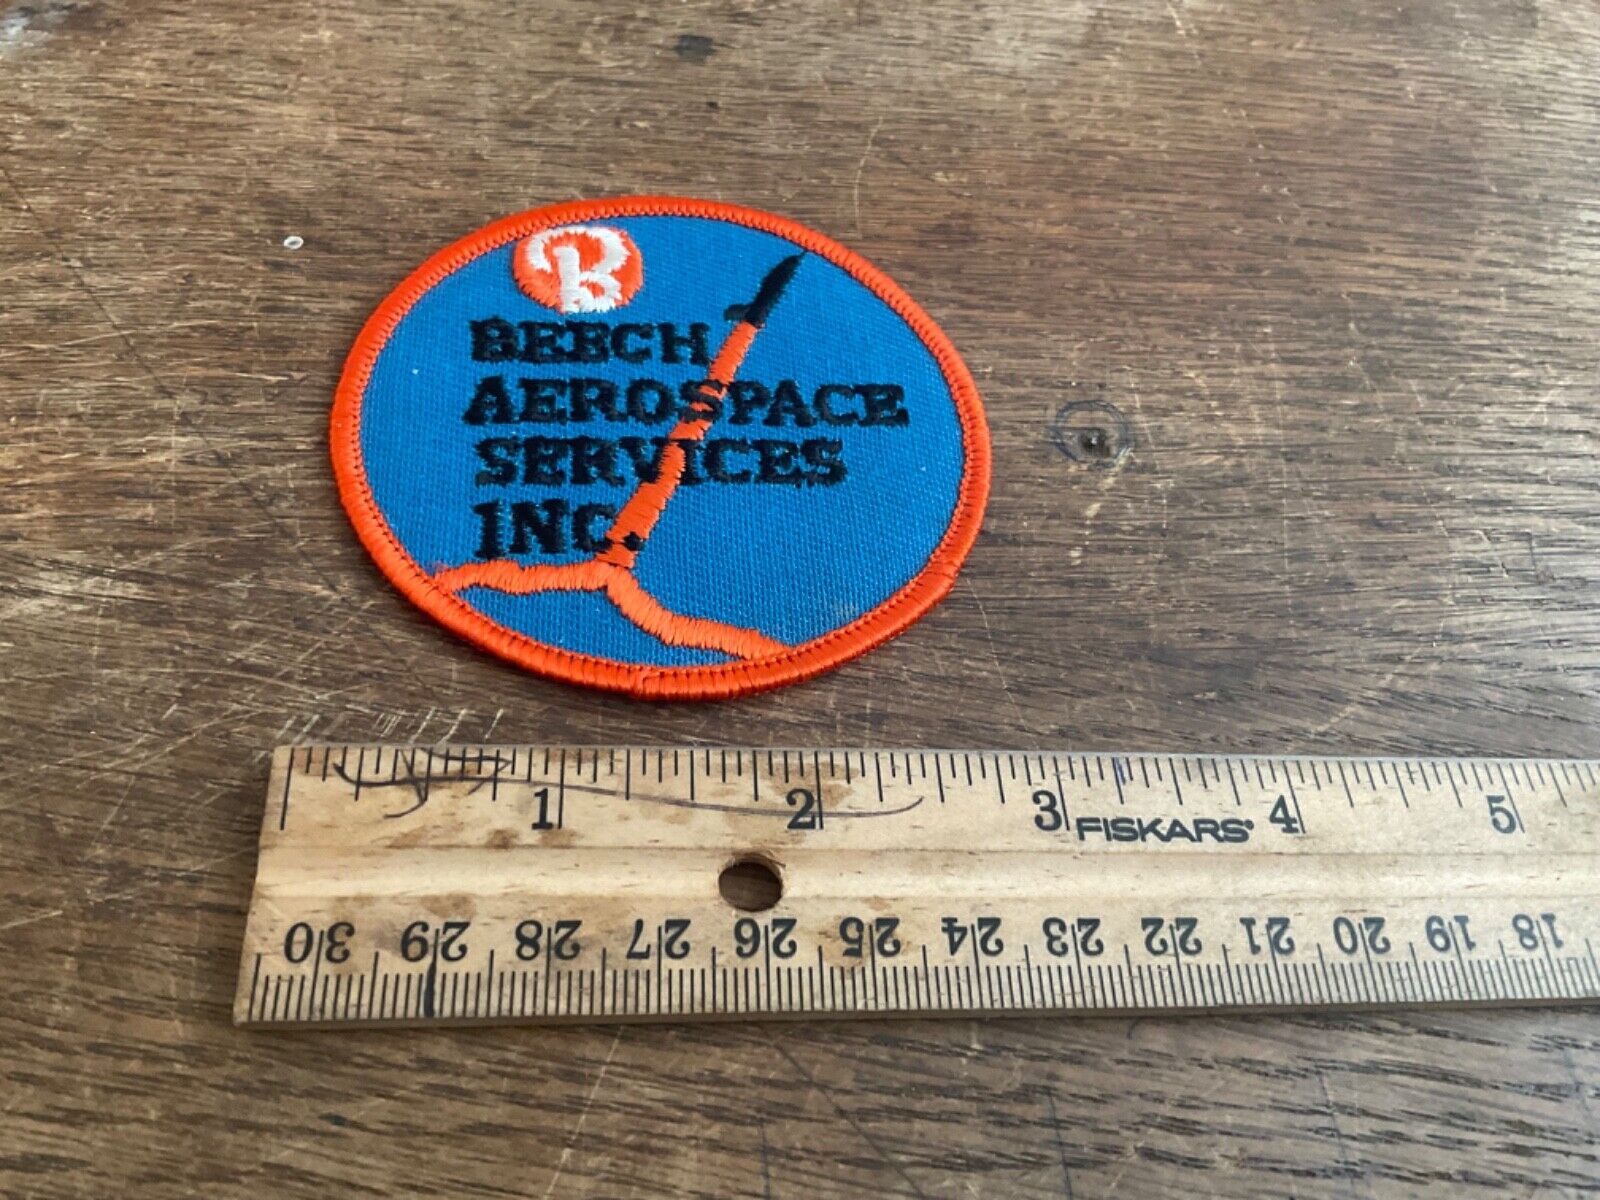 Beech Aerospace Services Madison Mississippi Vintage Patch